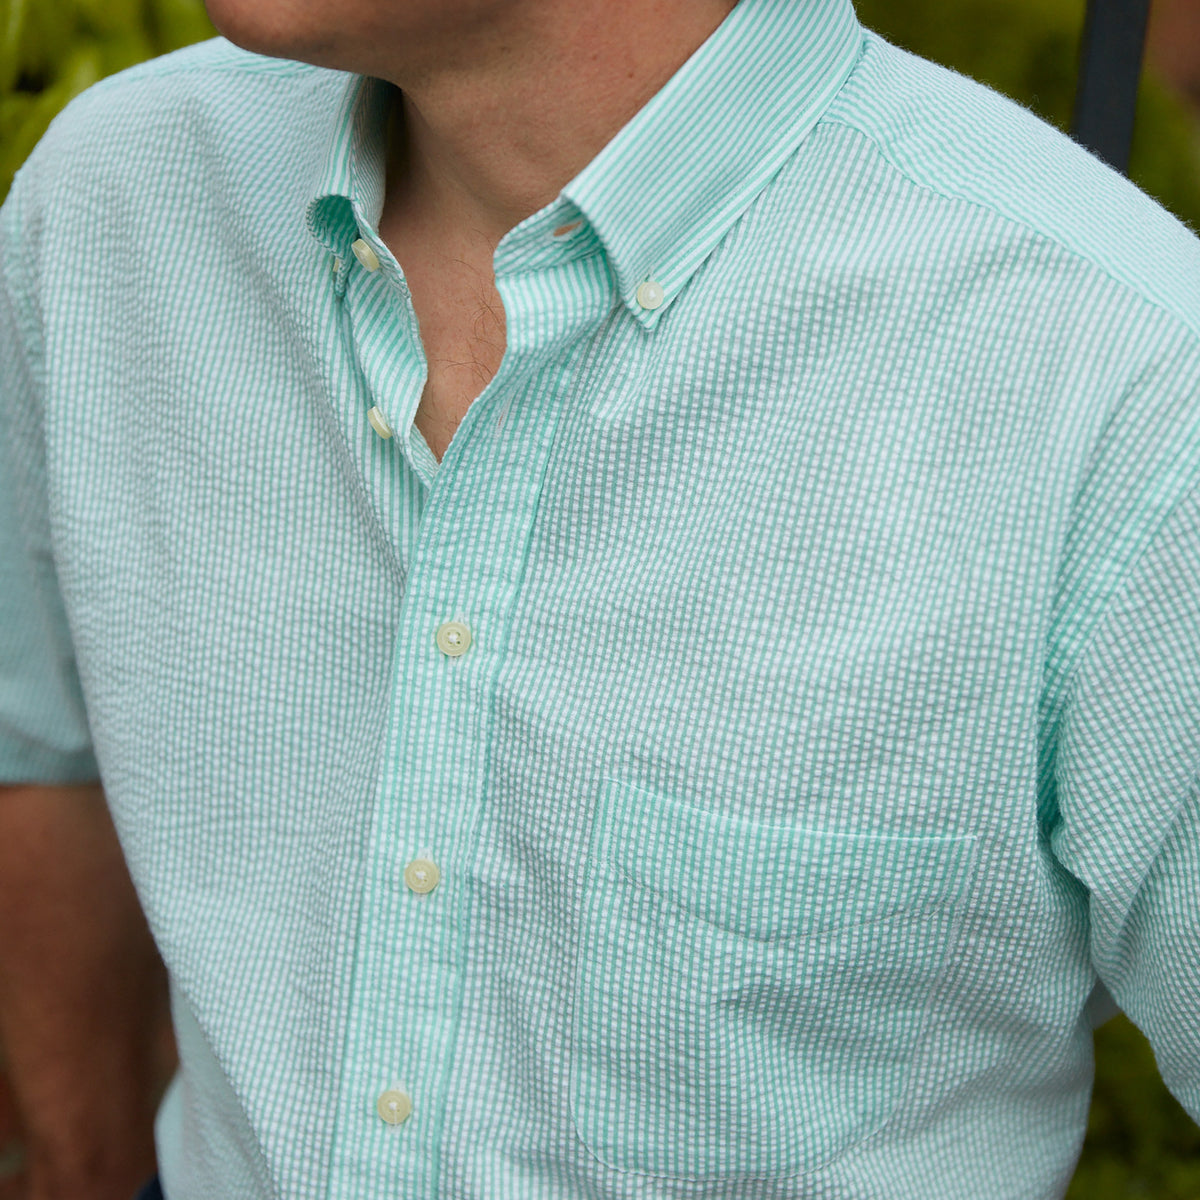 Seersucker all year long in a minty green seersucker shirt. Subtle, lightweight, and a texture they begs a second look.  100% Cotton Seersucker • Button Down Collar • Short Sleeve • Chest Pocket • Machine Washable • Made in Italy